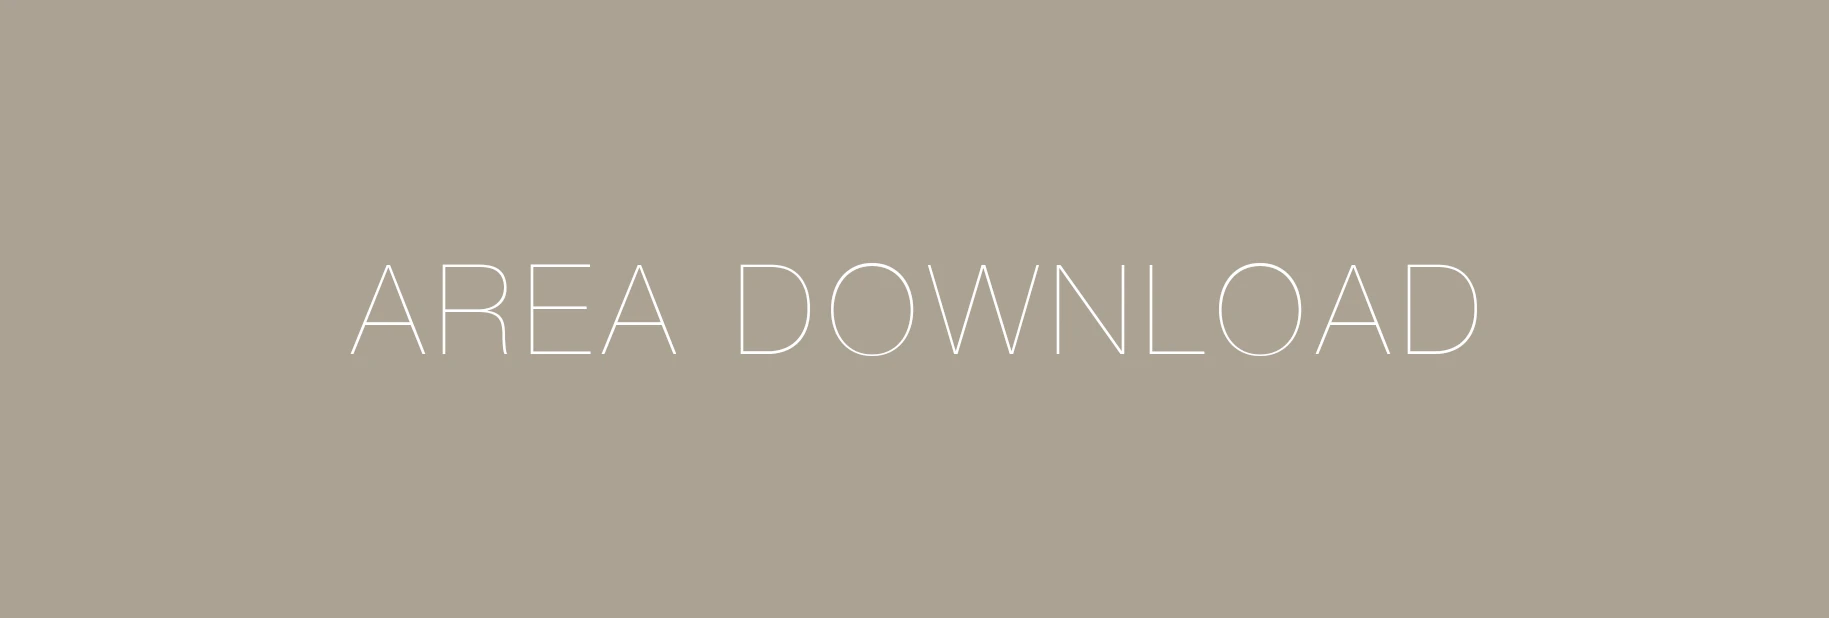 AREA DOWNLOAD